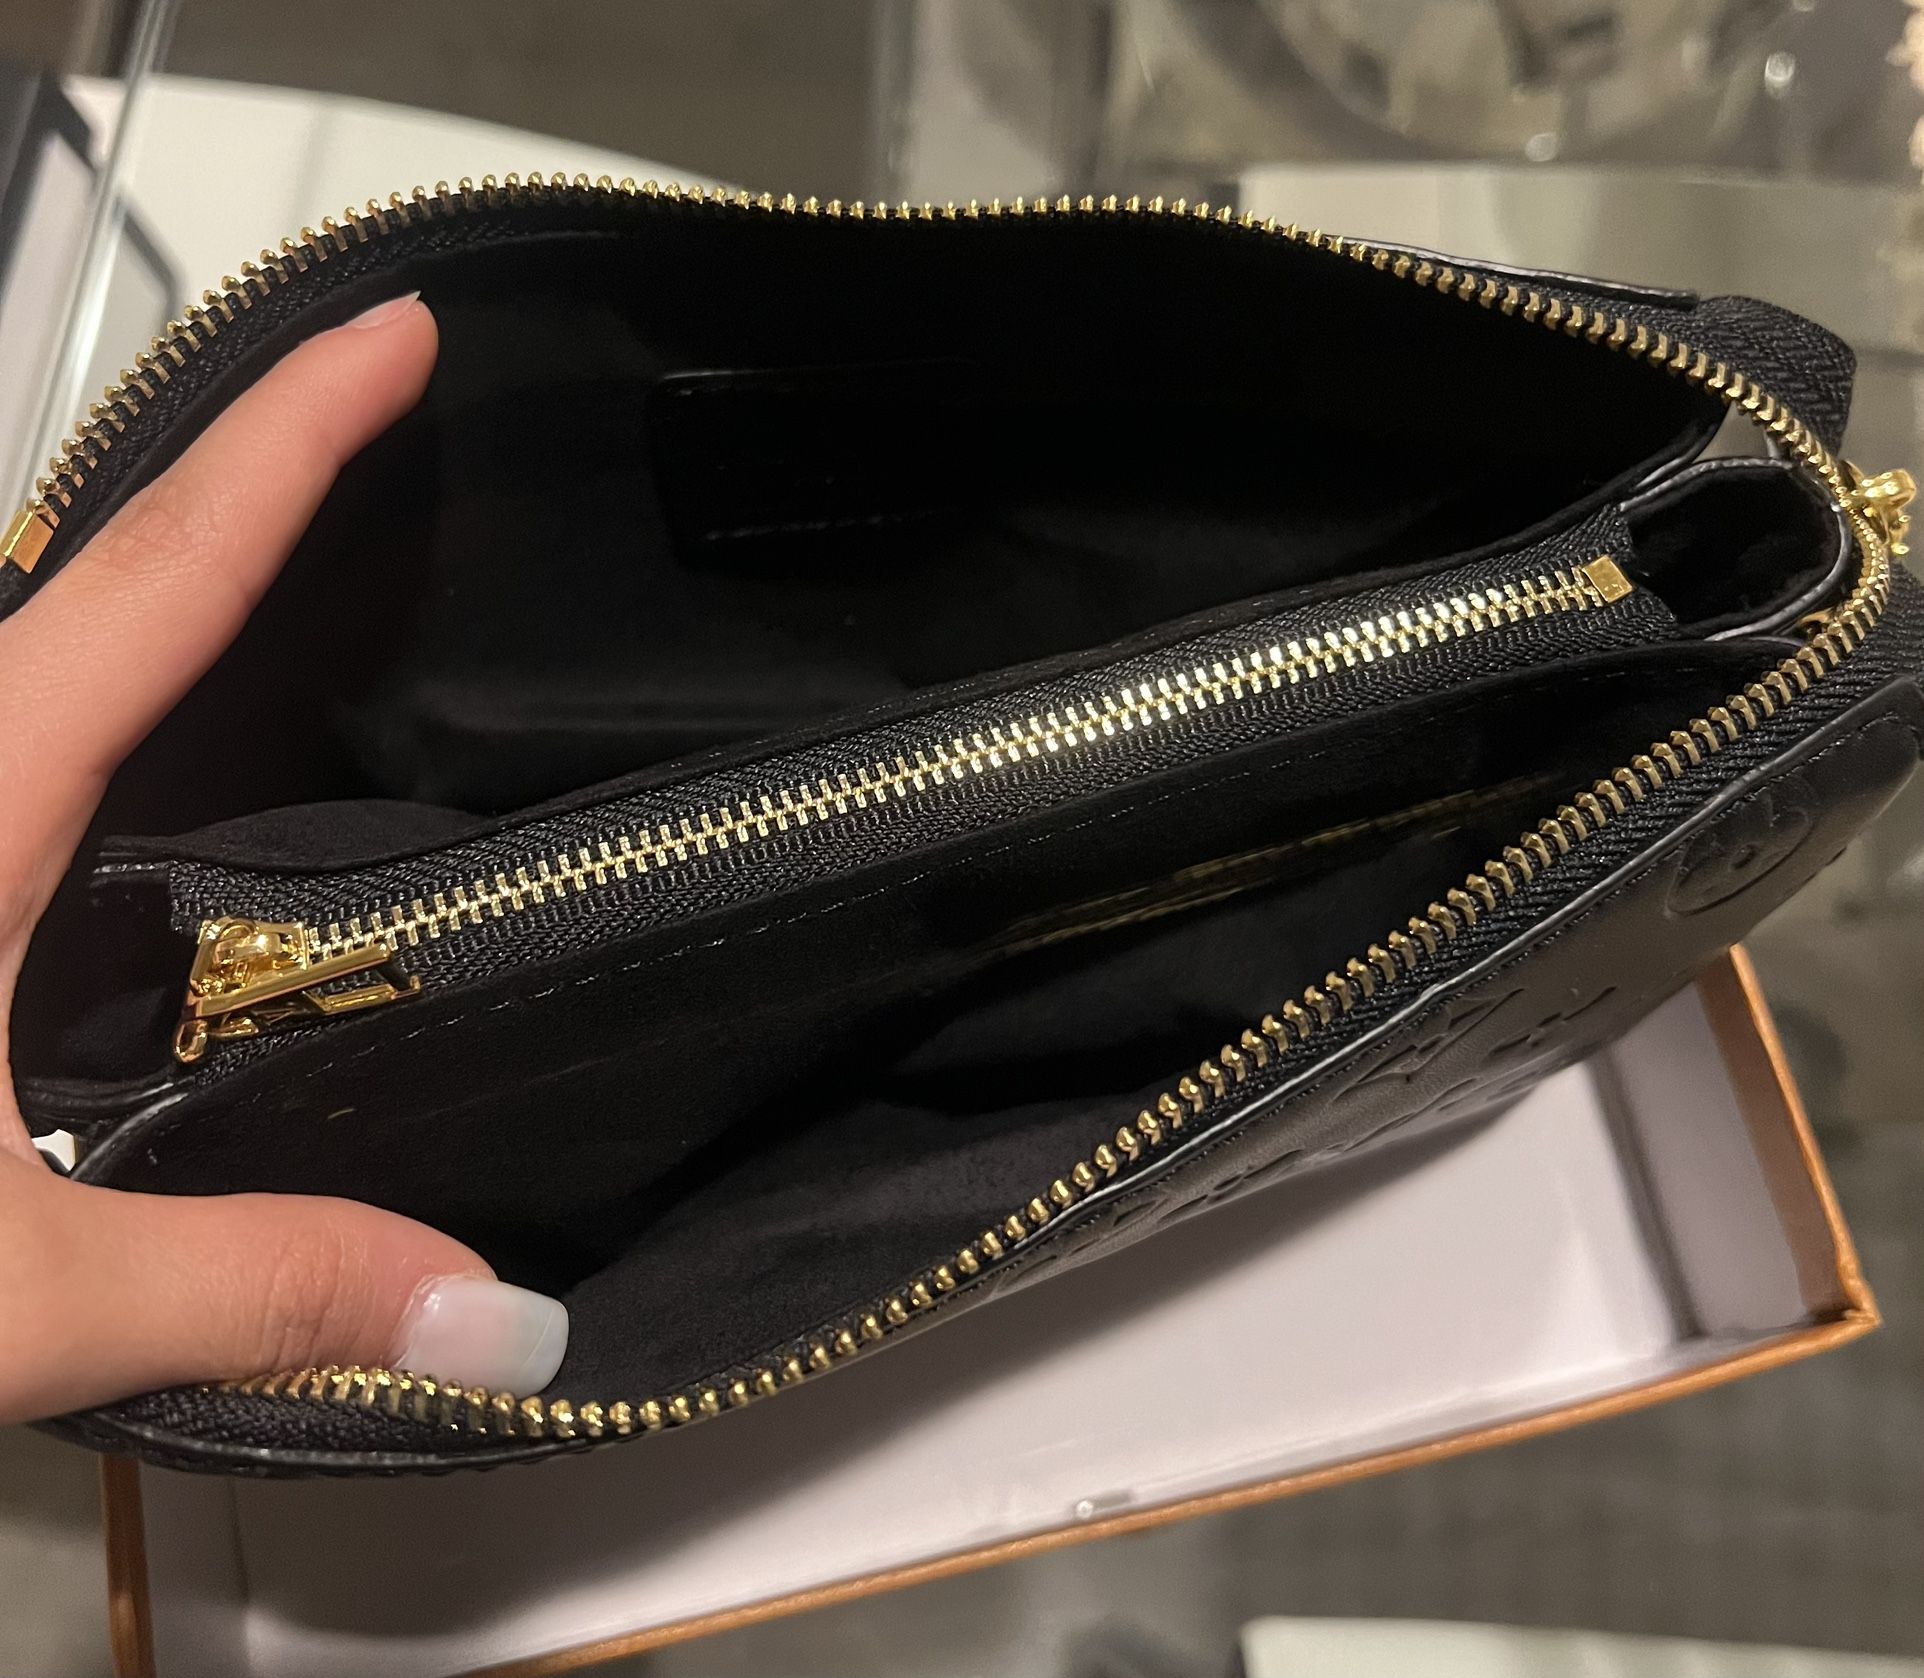 Louis Vuitton Epi Sac Plat Hand Bag Noir Black Unisex for Sale in Chevy  Chase, MD - OfferUp